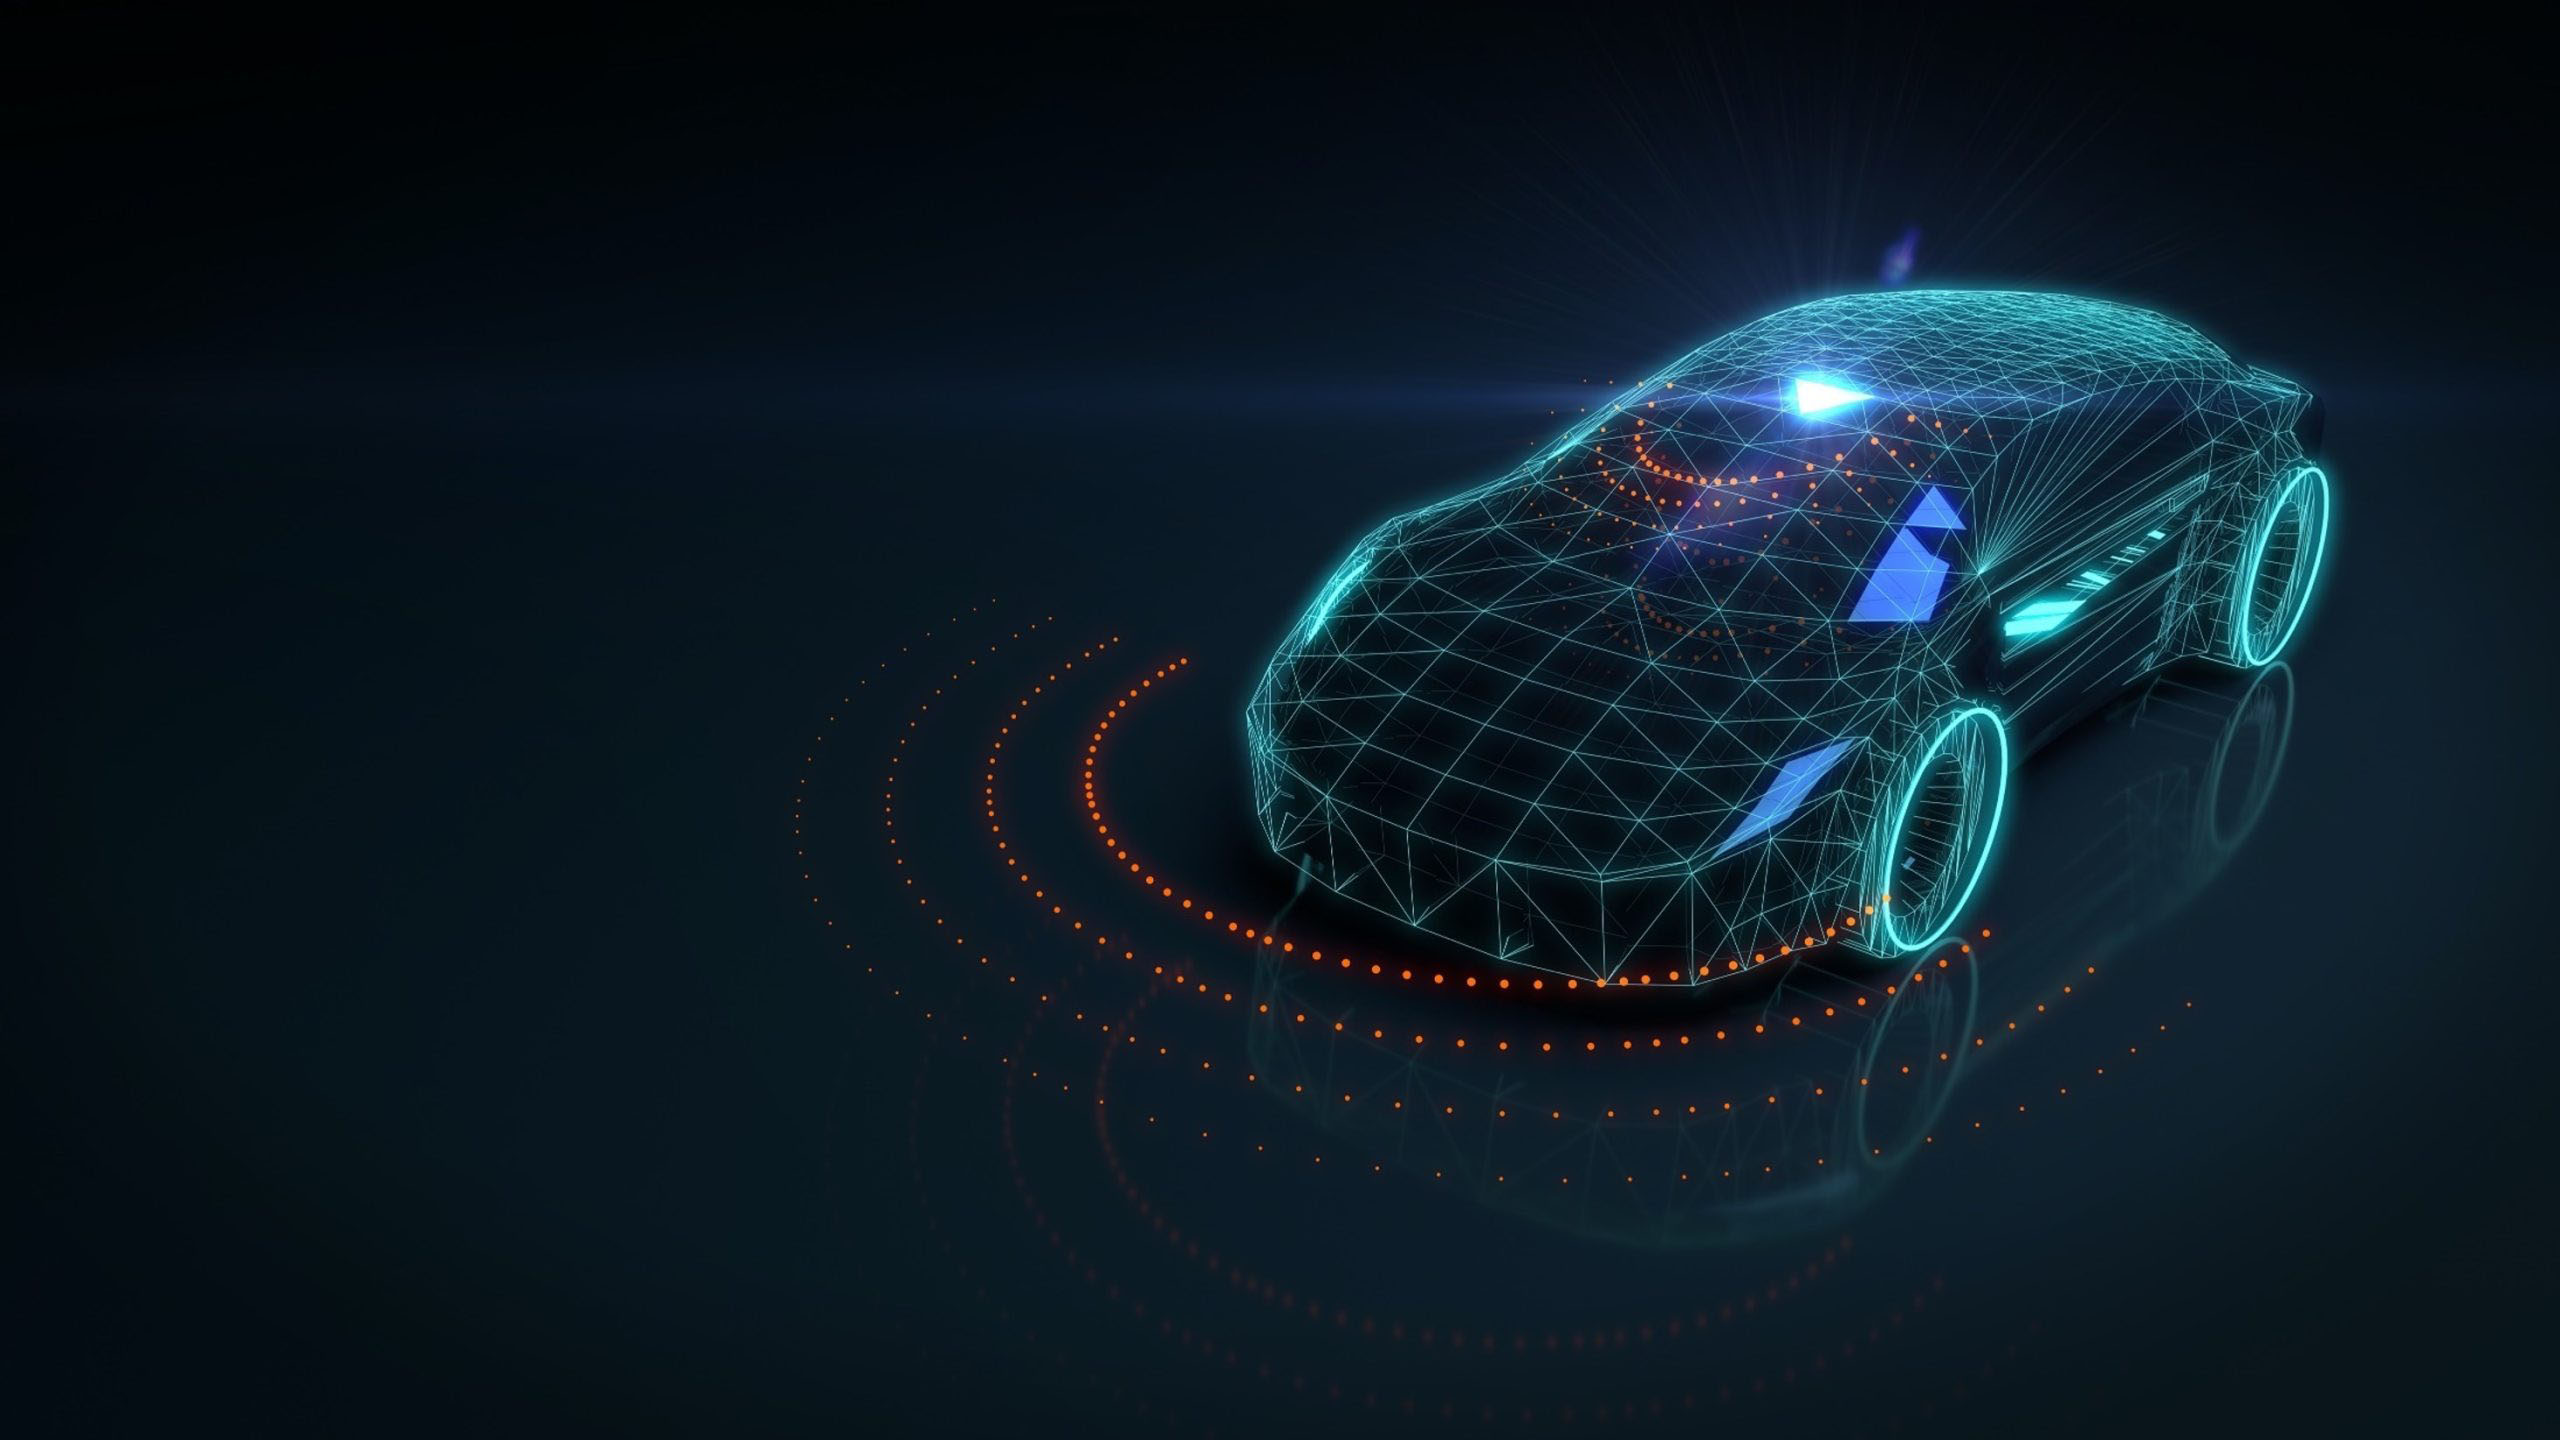 The Future of Mobility: Connected Vehicle